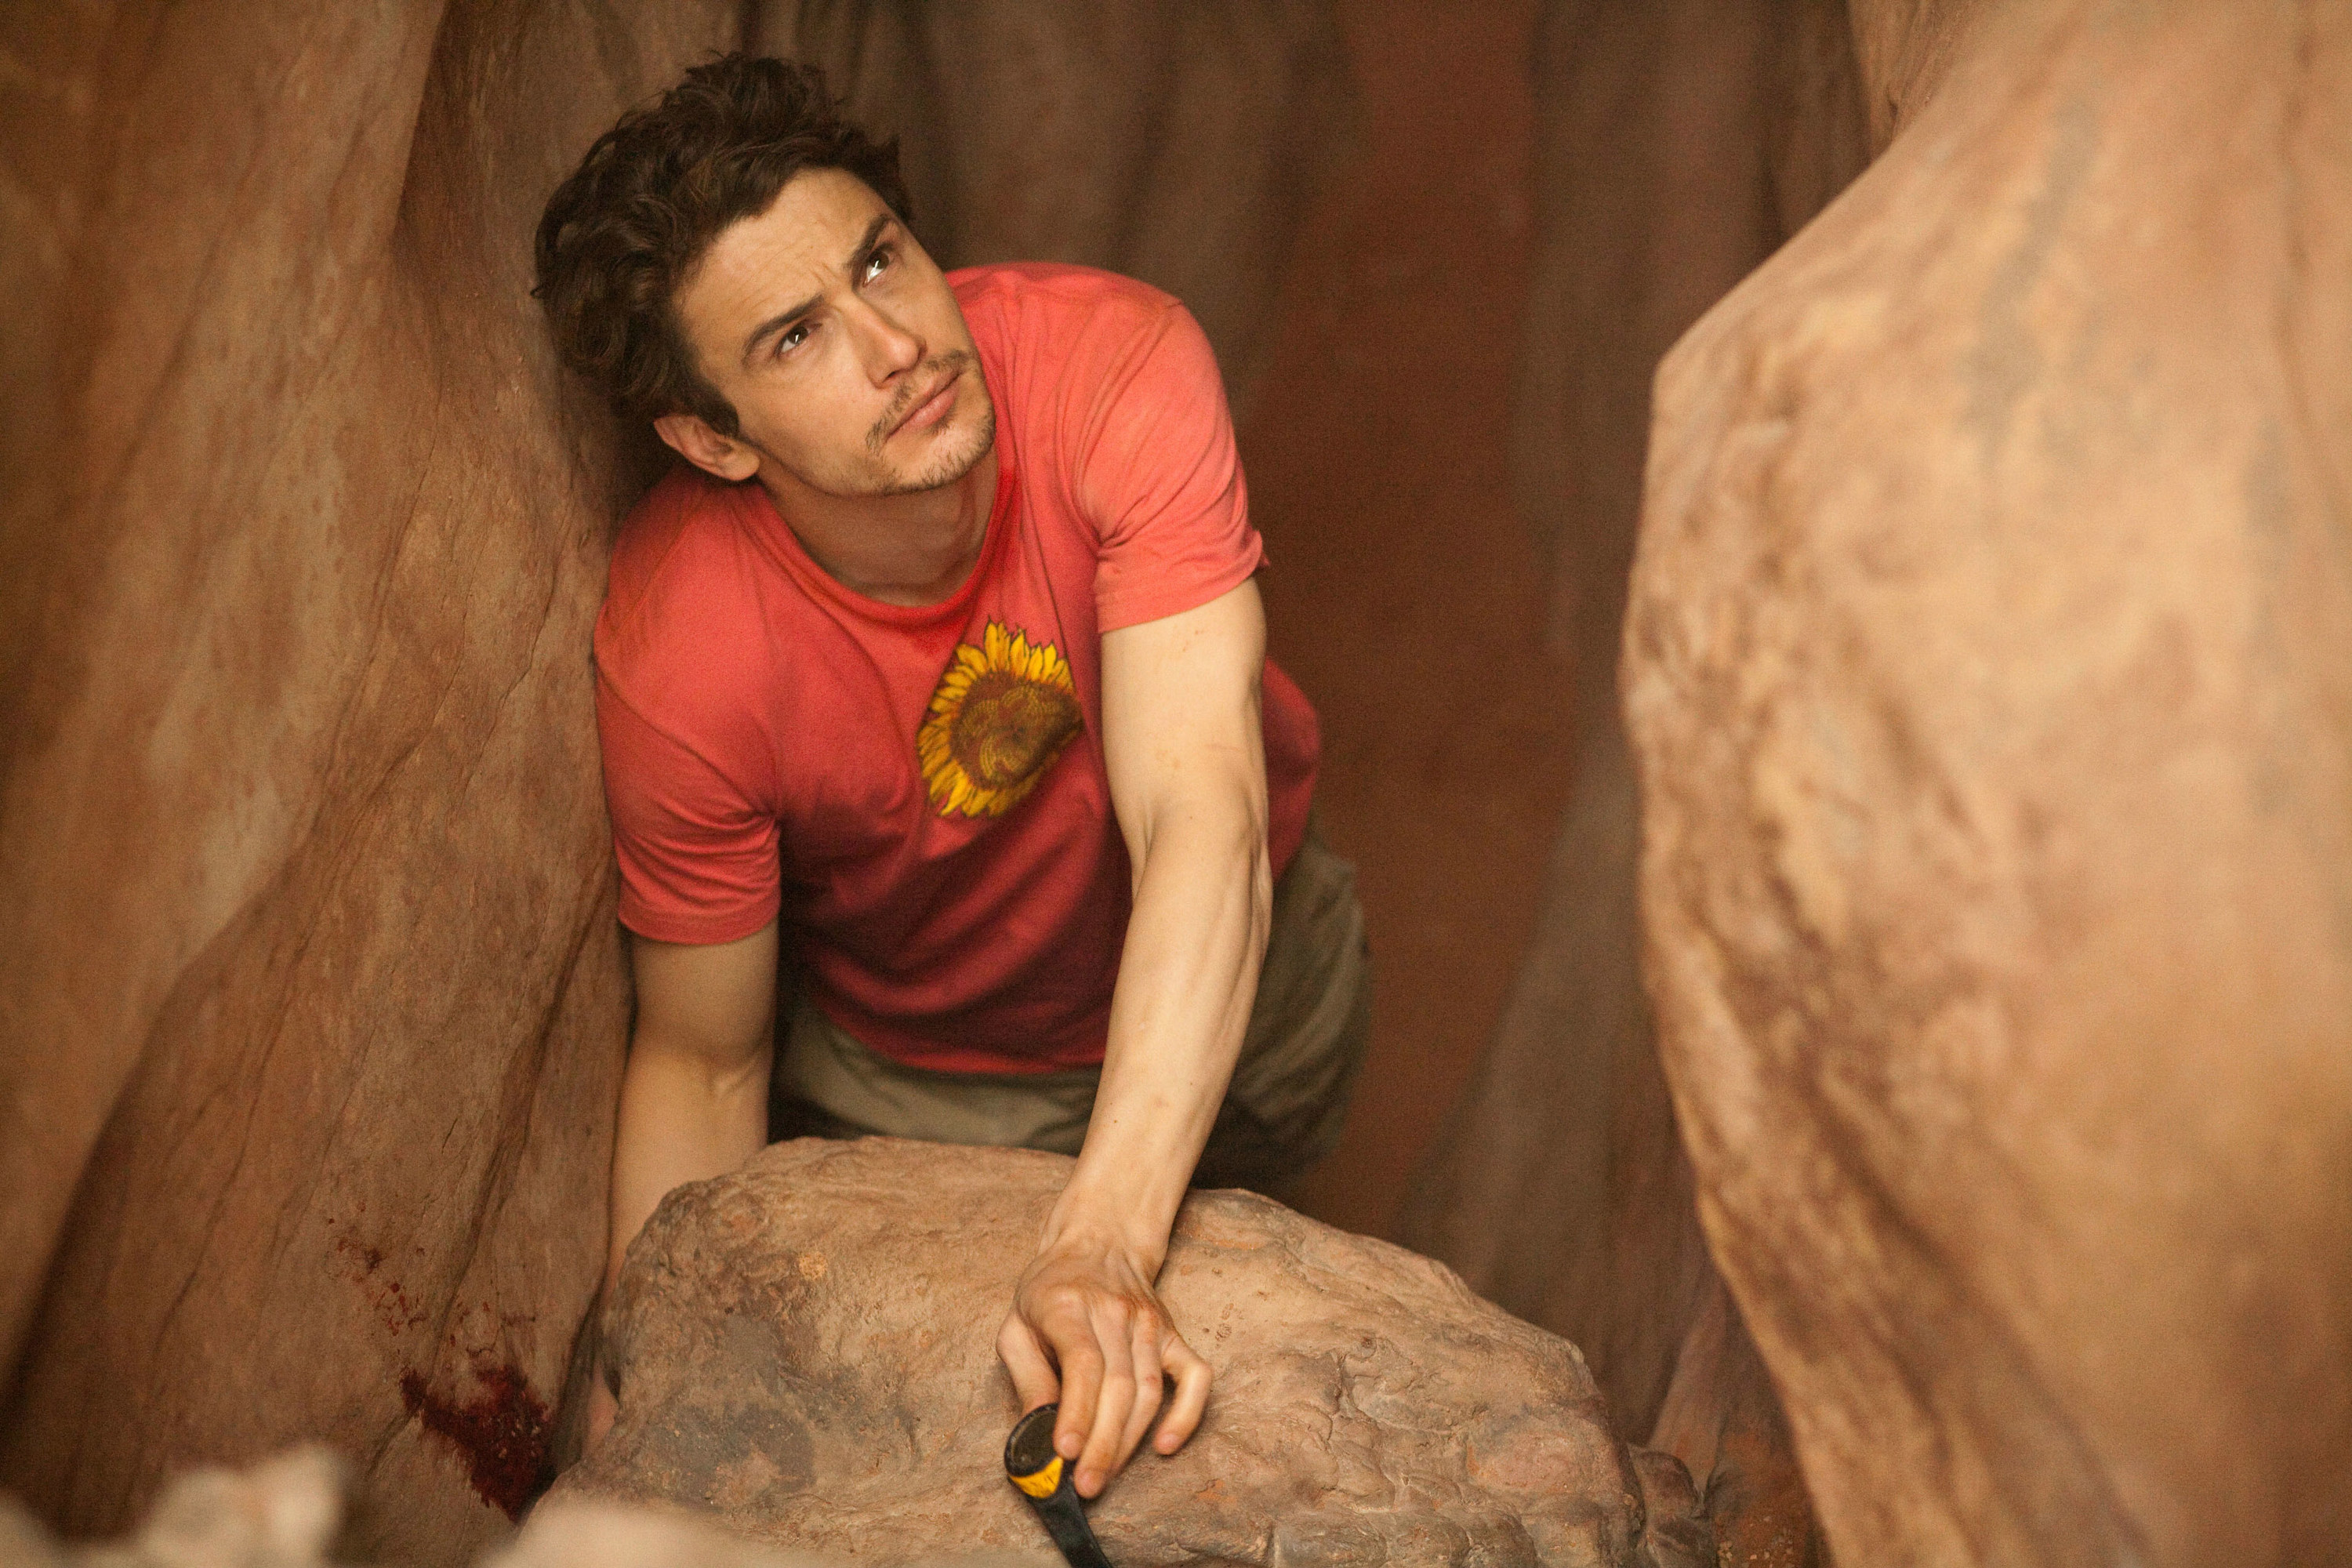 Franco as Ralston trapped in the rock